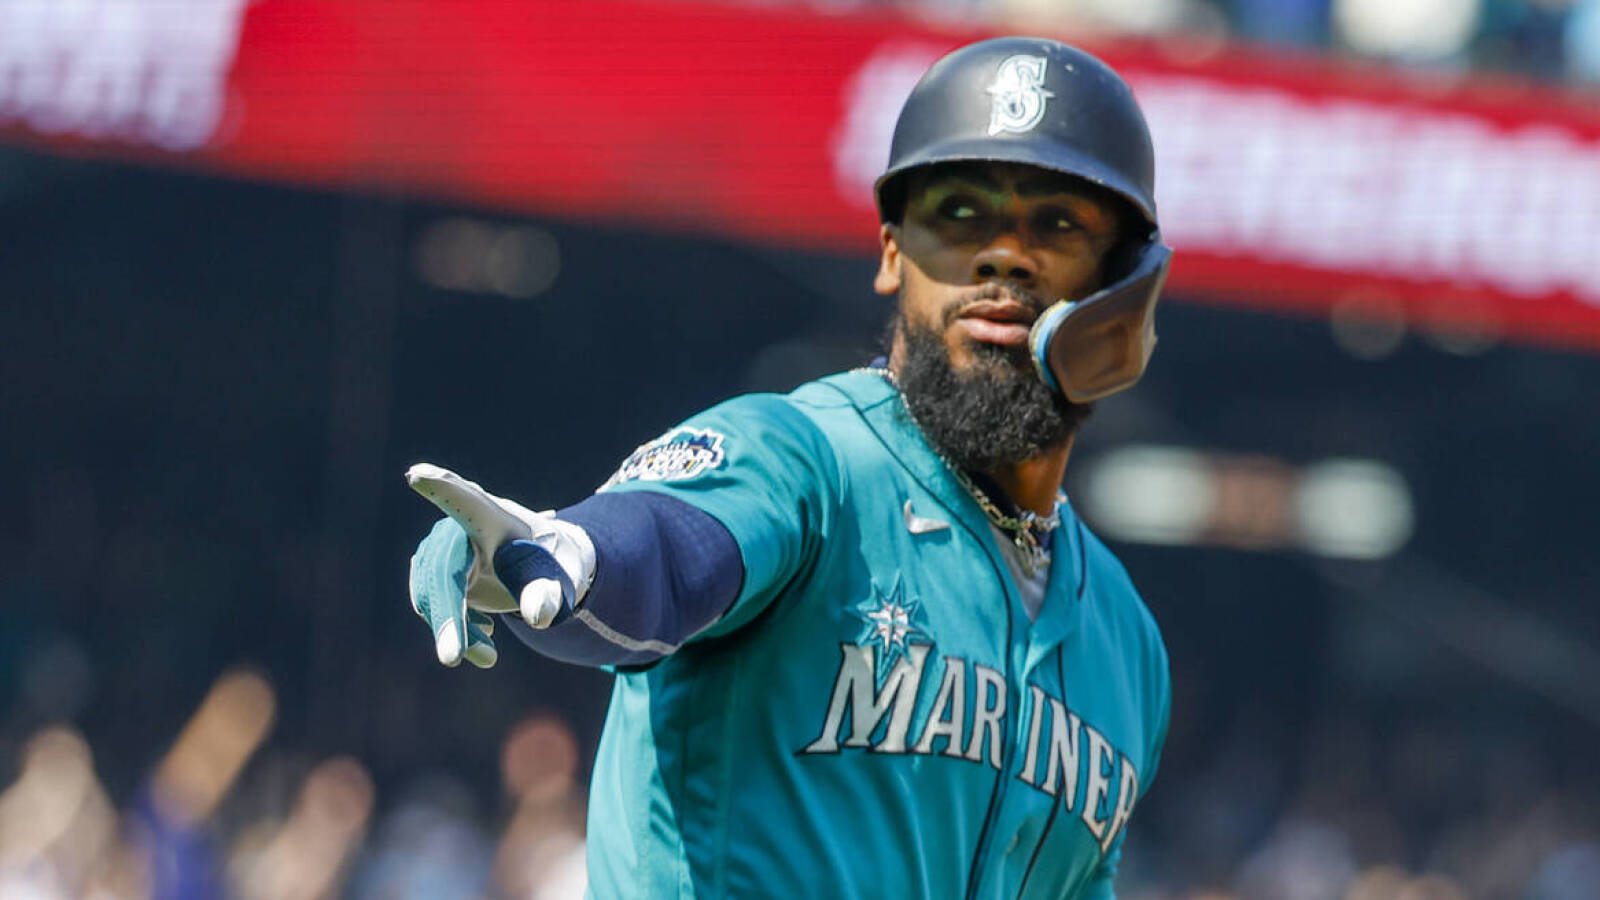 Mariners shockingly don't extend qualifying offer to former All-Star OF